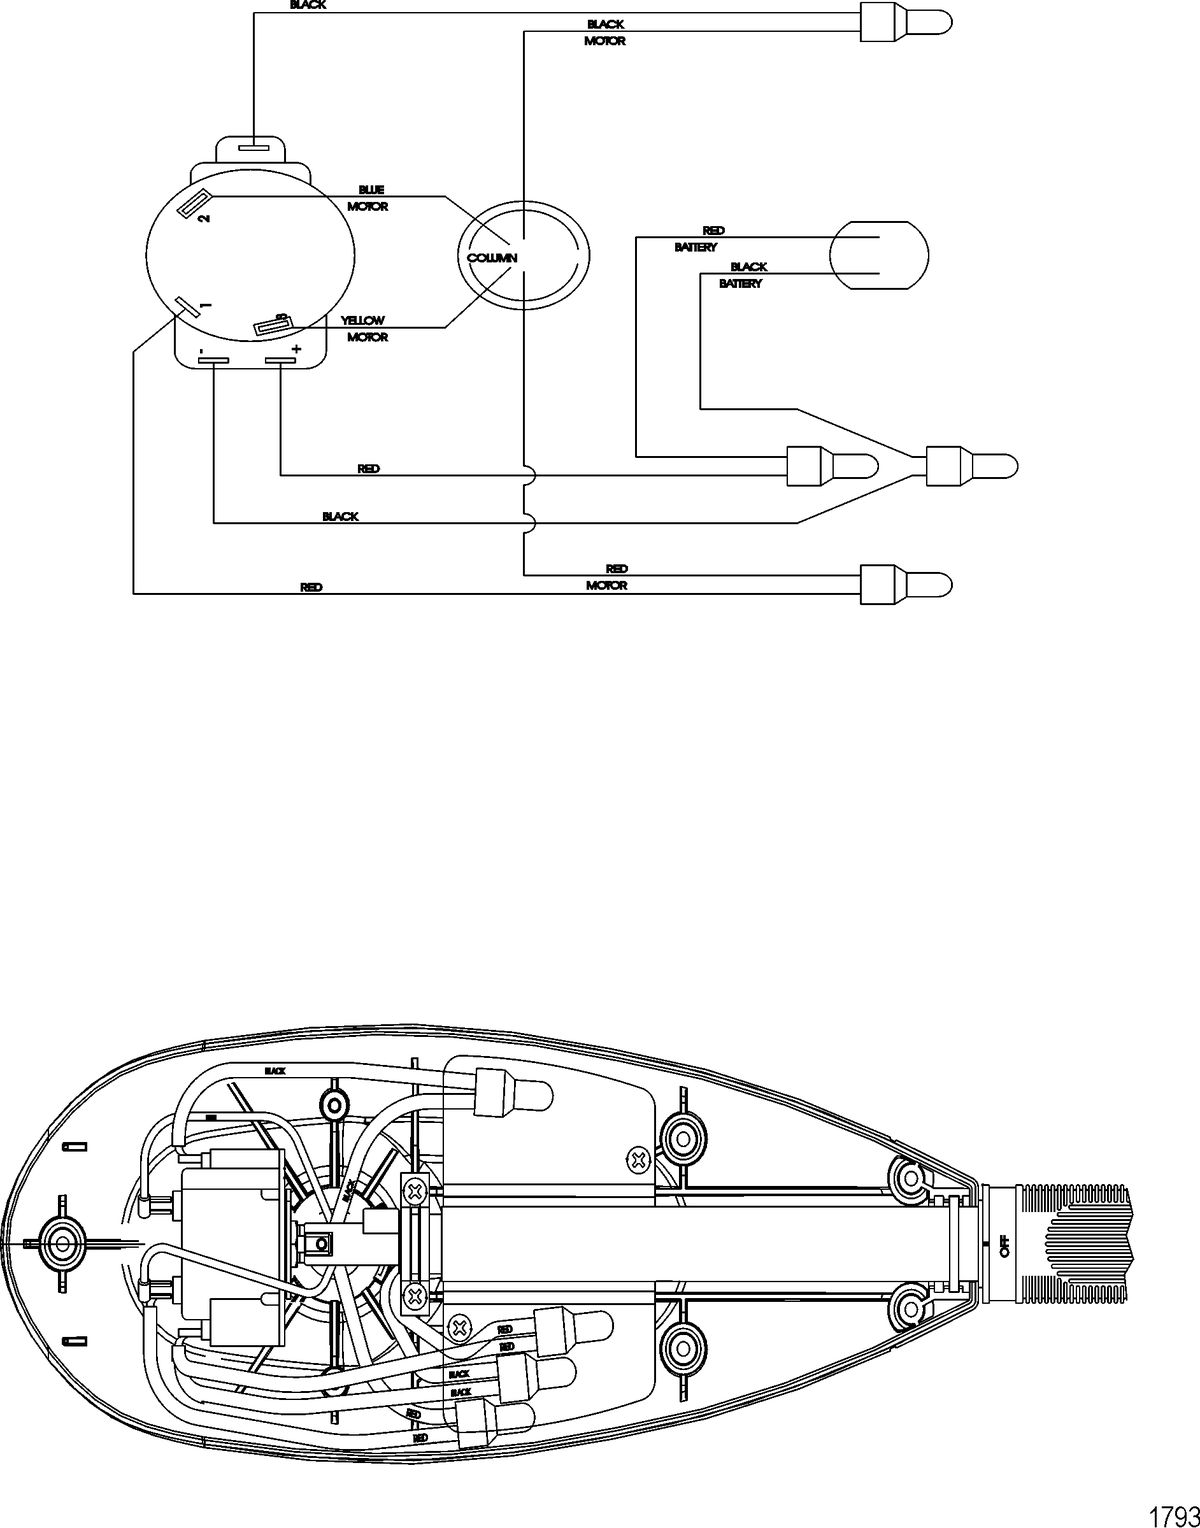 TROLLING MOTOR MOTORGUIDE THRUSTER SERIES Wire Diagram(Model T54) (Without Quick Connect)